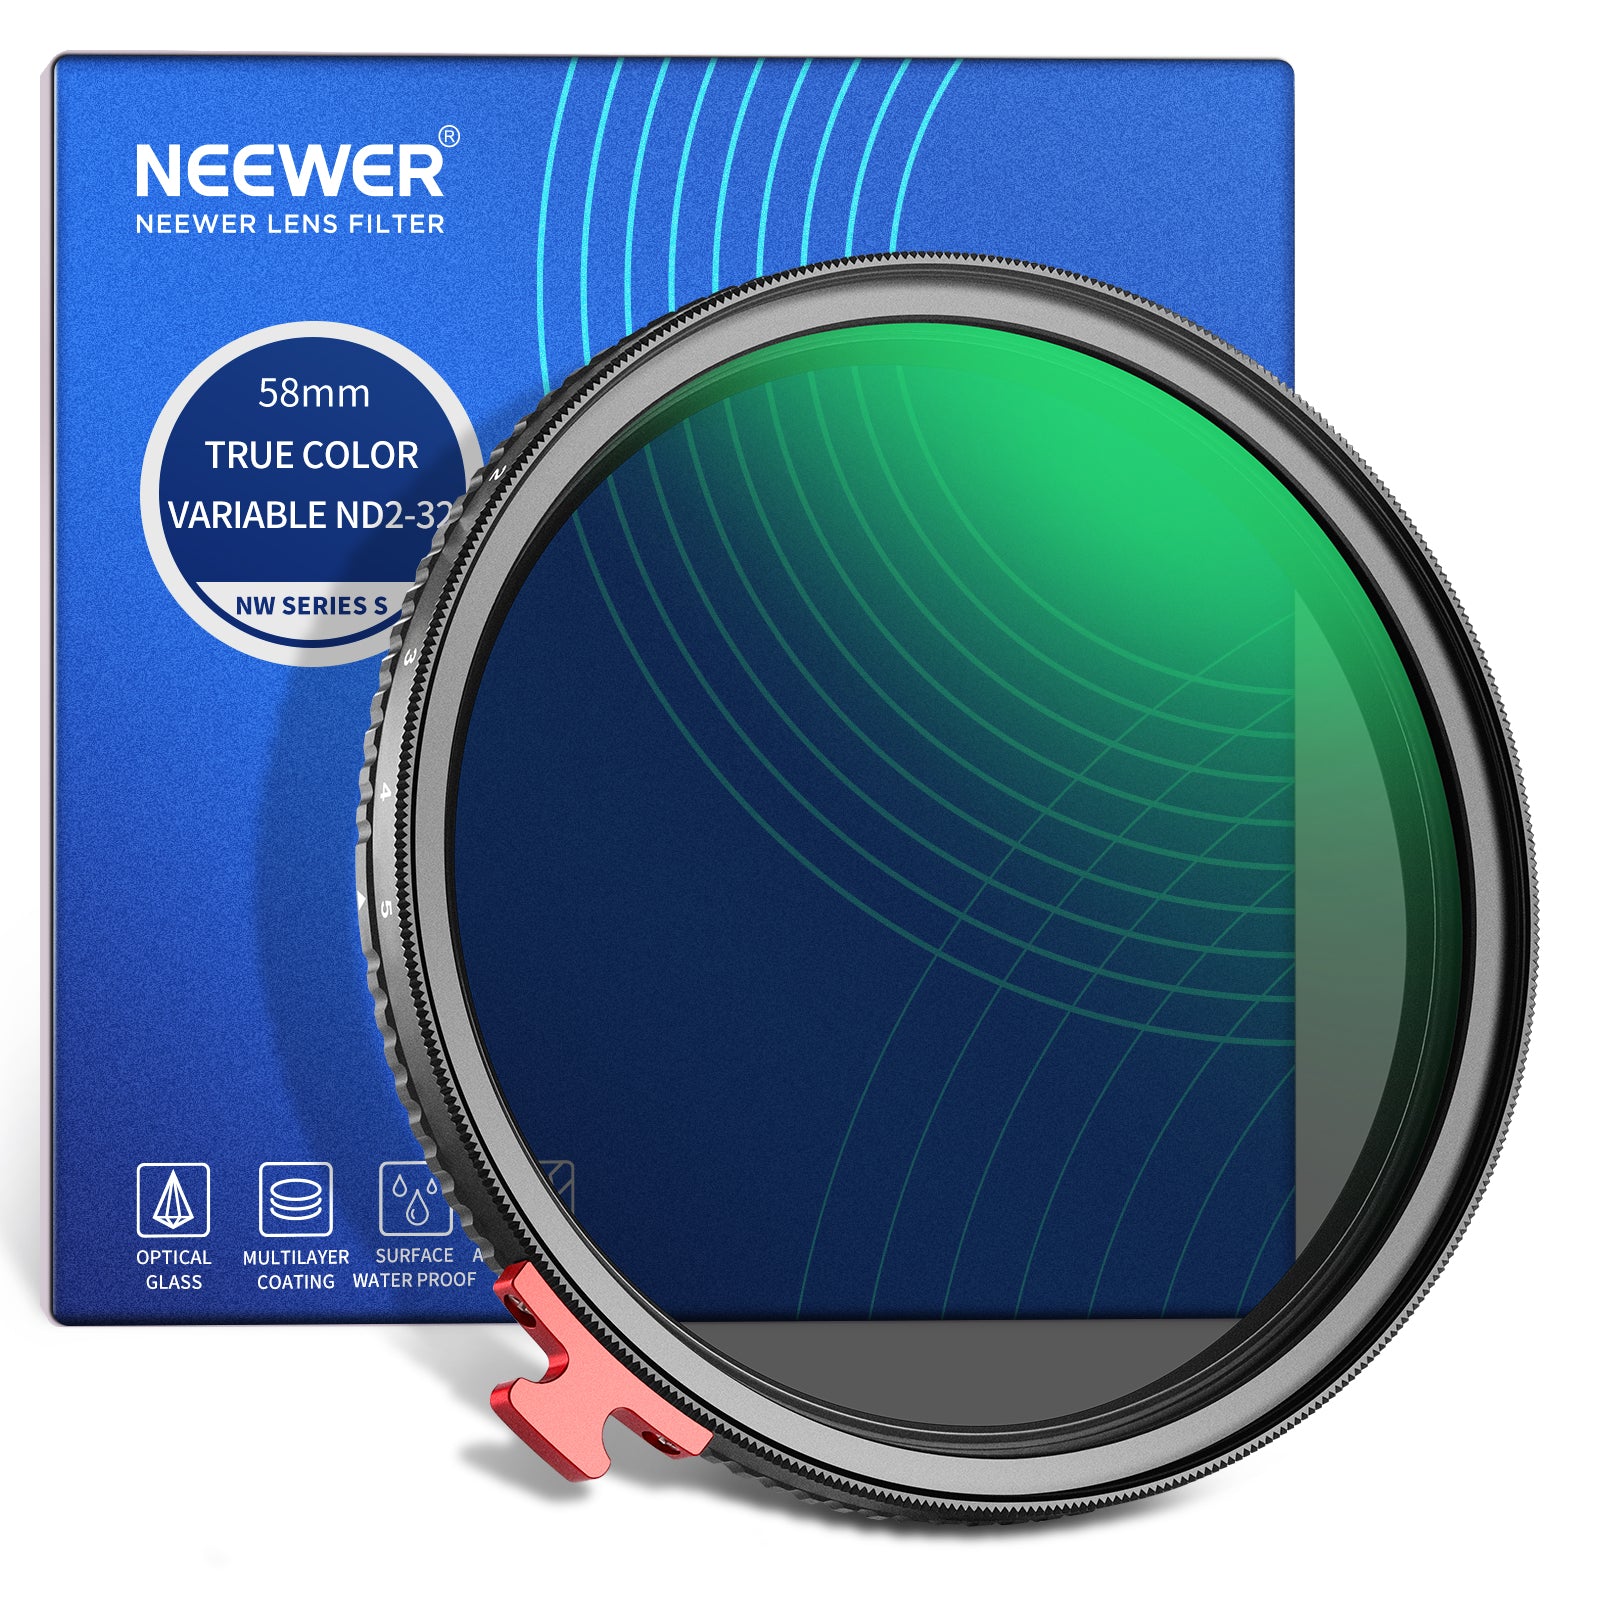 NEEWER True Color Variable ND Filter ND2-32 (1-5 Stops)